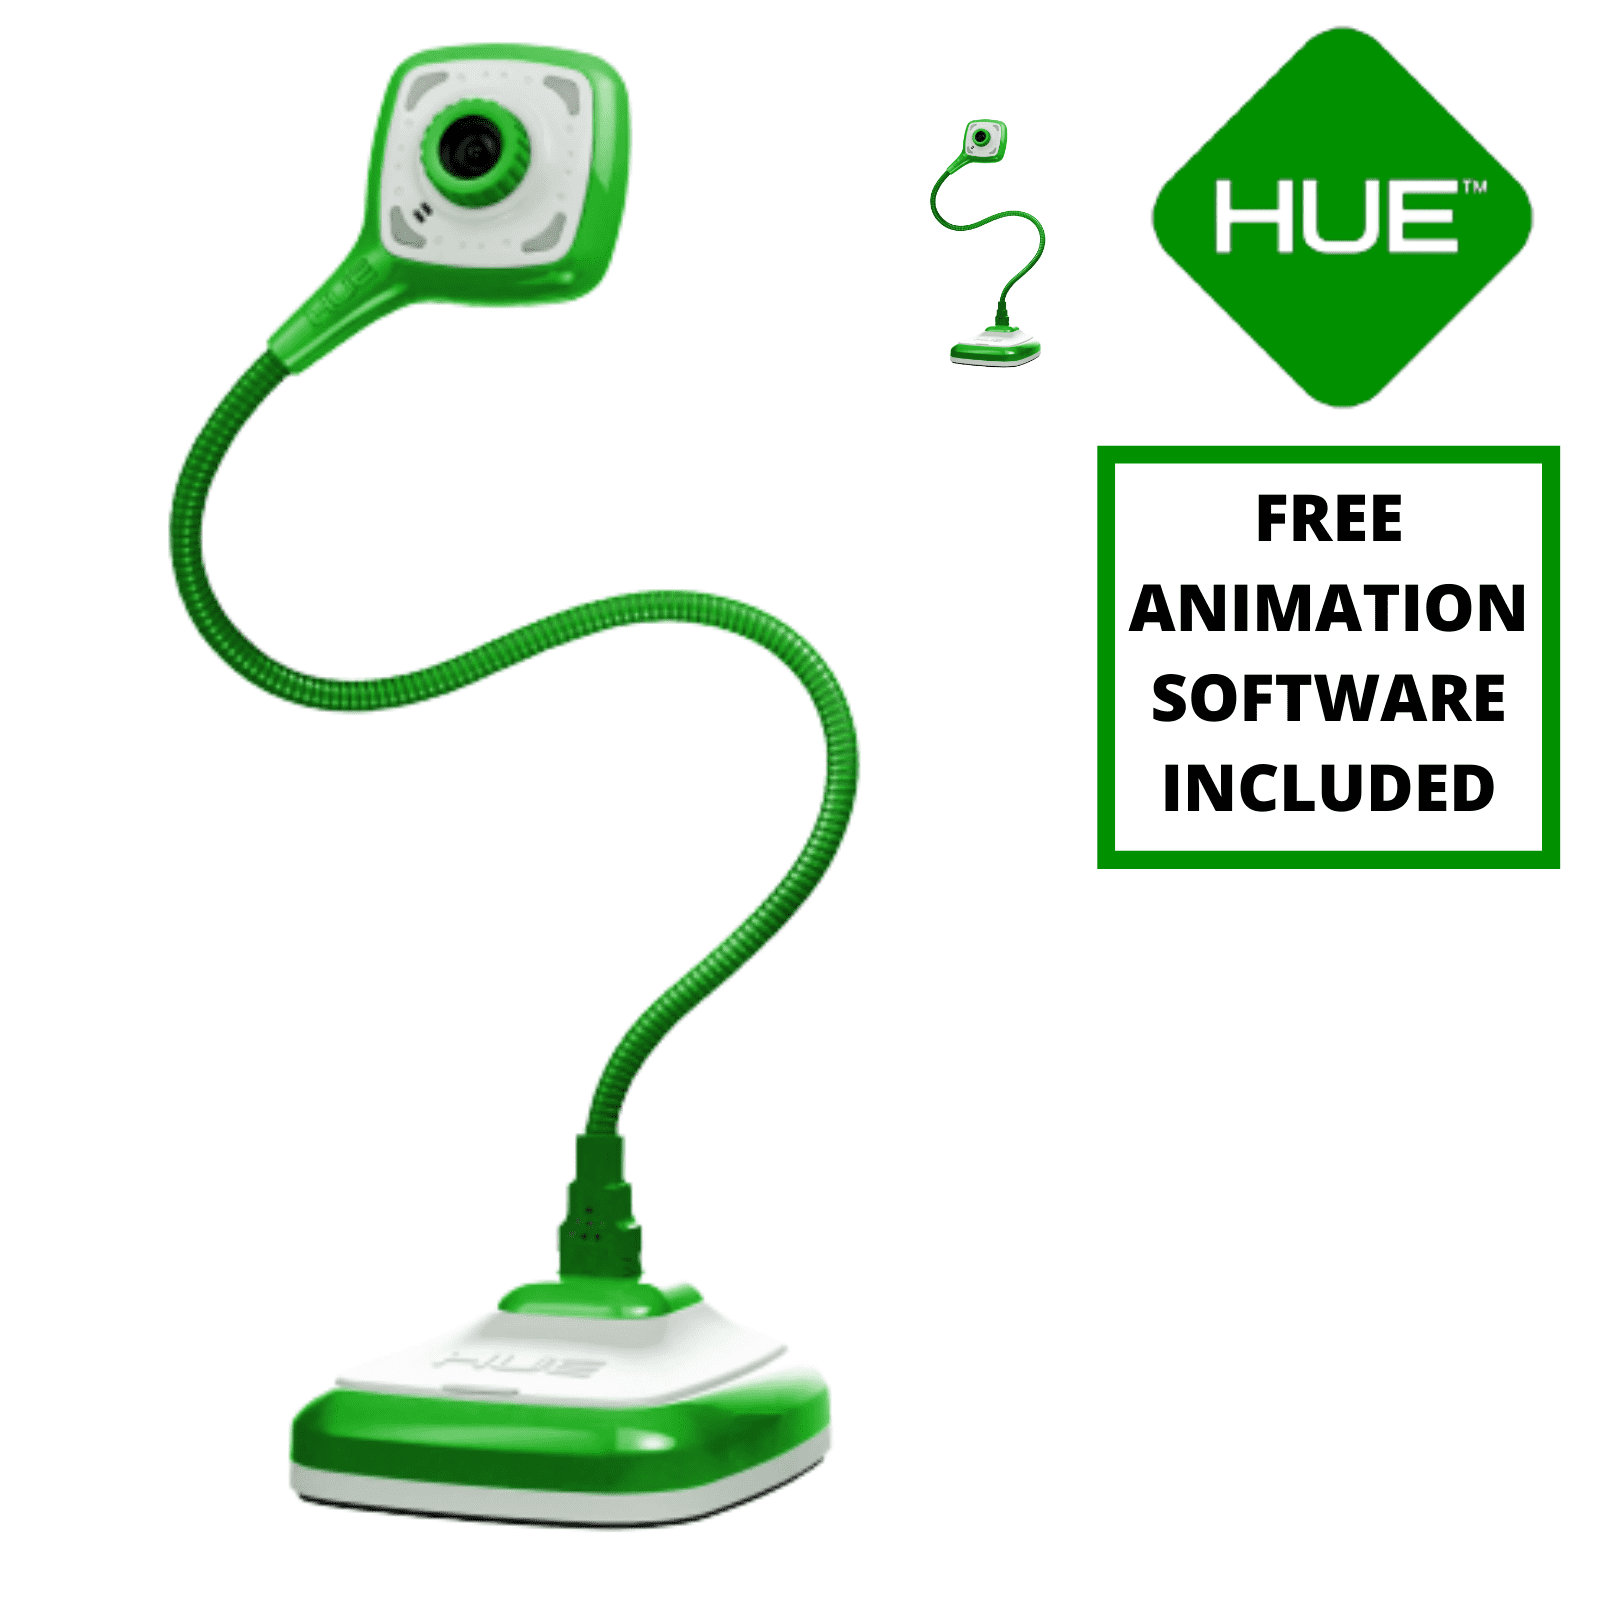 Hue HD Pro USB Camera Document Camera for Windows, macOs and Chrome OS with  Motion Animation Kit, Wireless Webcam (Green) | 4k Classroom Visual